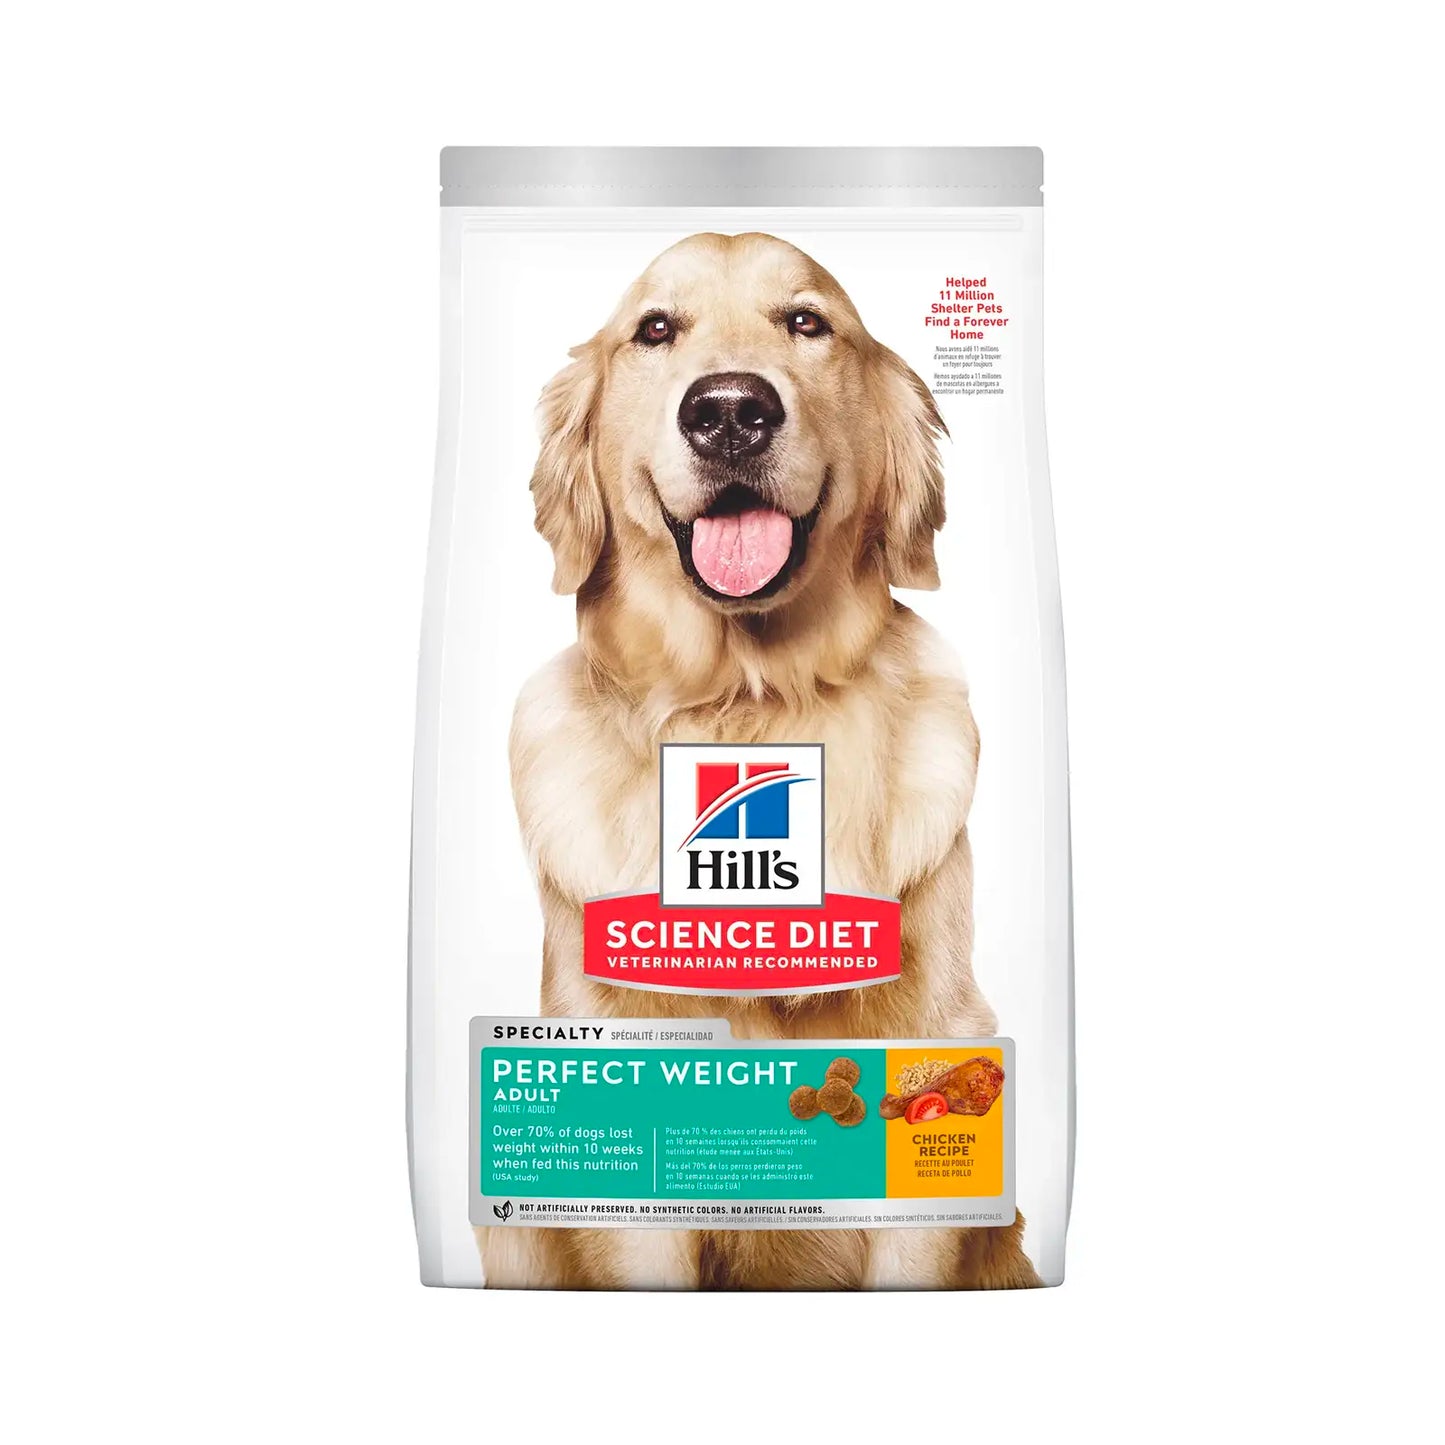 Hill's Science Diet (Specialty) - Canine Adult Perfect Weight